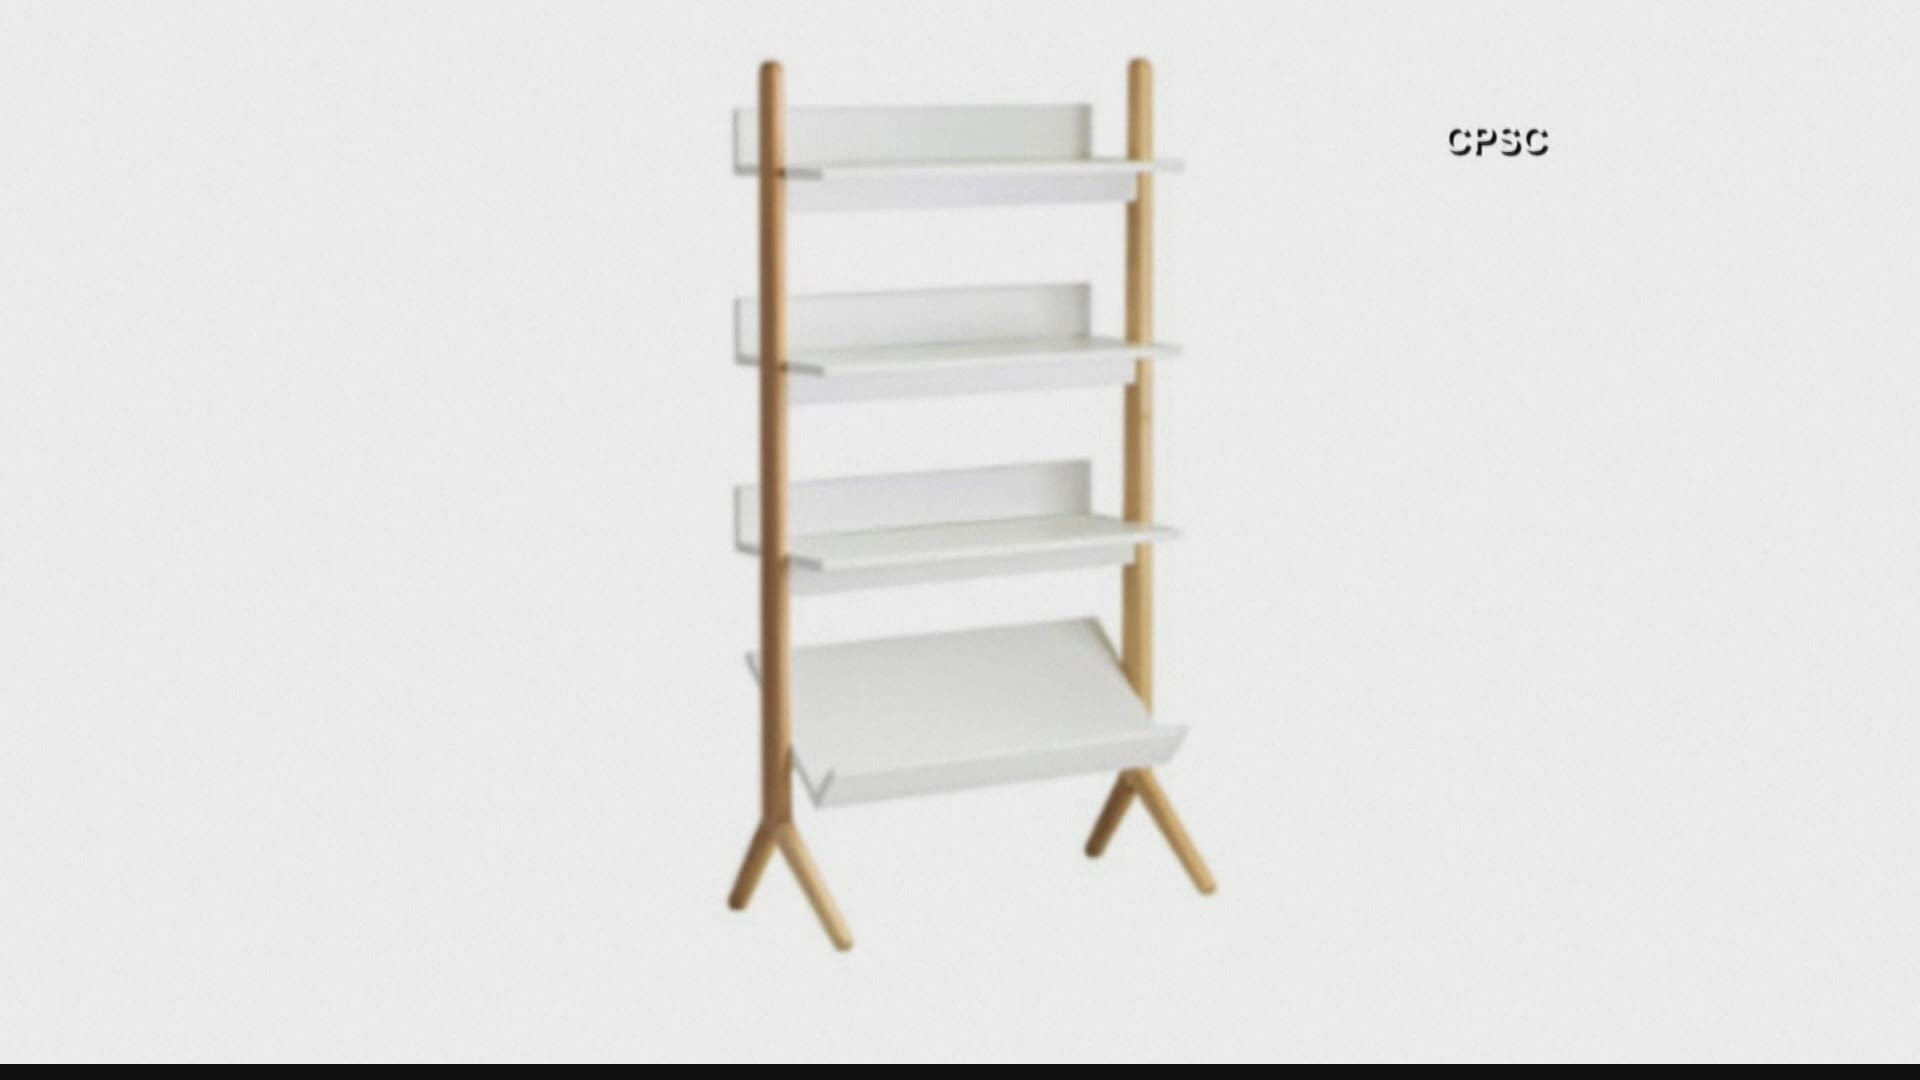 Some chairs from Bed Bath & Beyond and bookcases from Crate & Barrel have been recalled.